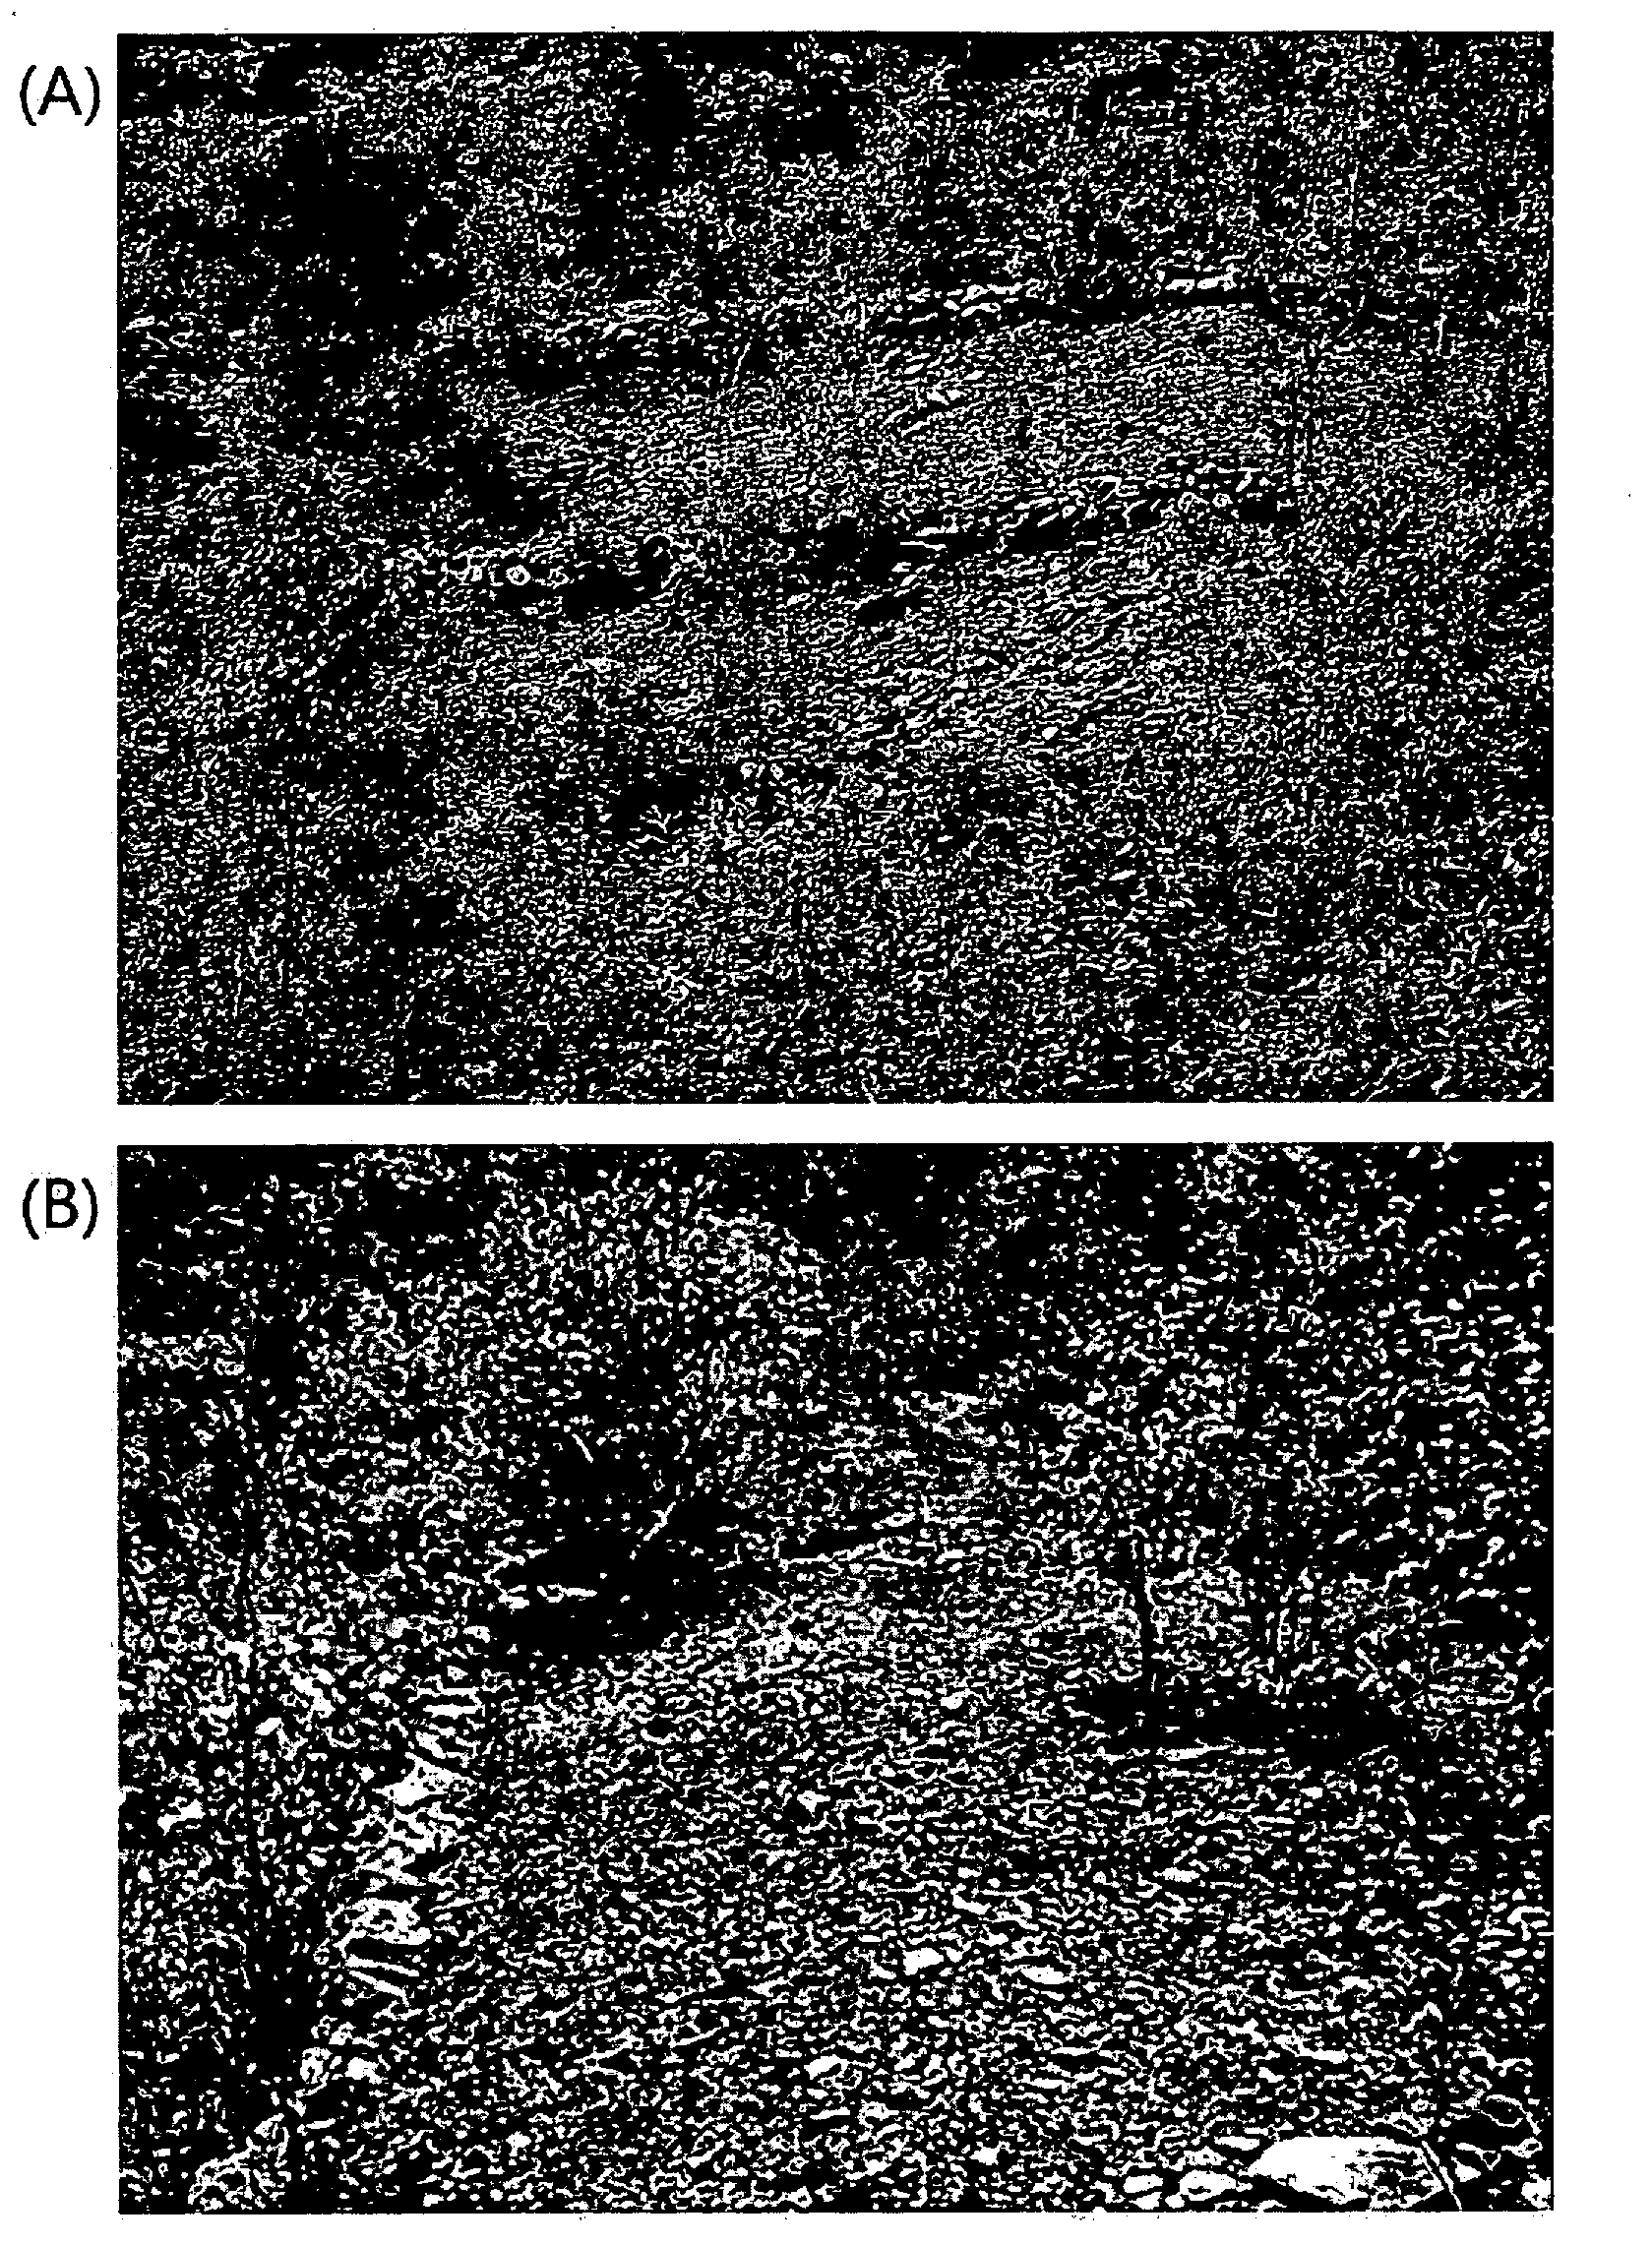 Method for producing thalli of lichens, method for restoring the degraded ecology by them, and compositions therefor